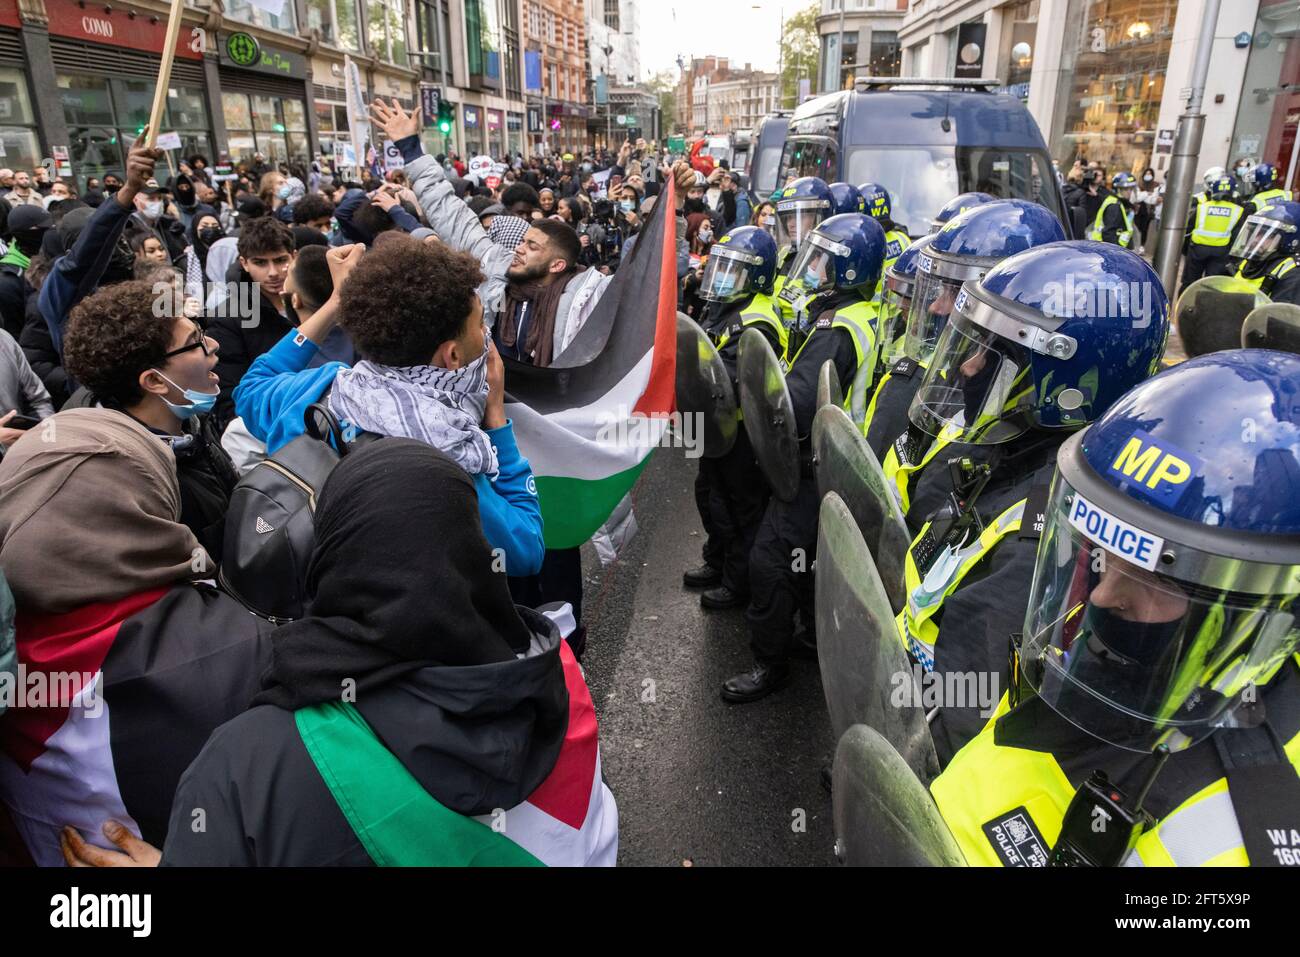 Protesters hold a Palestinian flag in front of police, 'Free Palestine' protest, London, 15 May 2021 Stock Photo